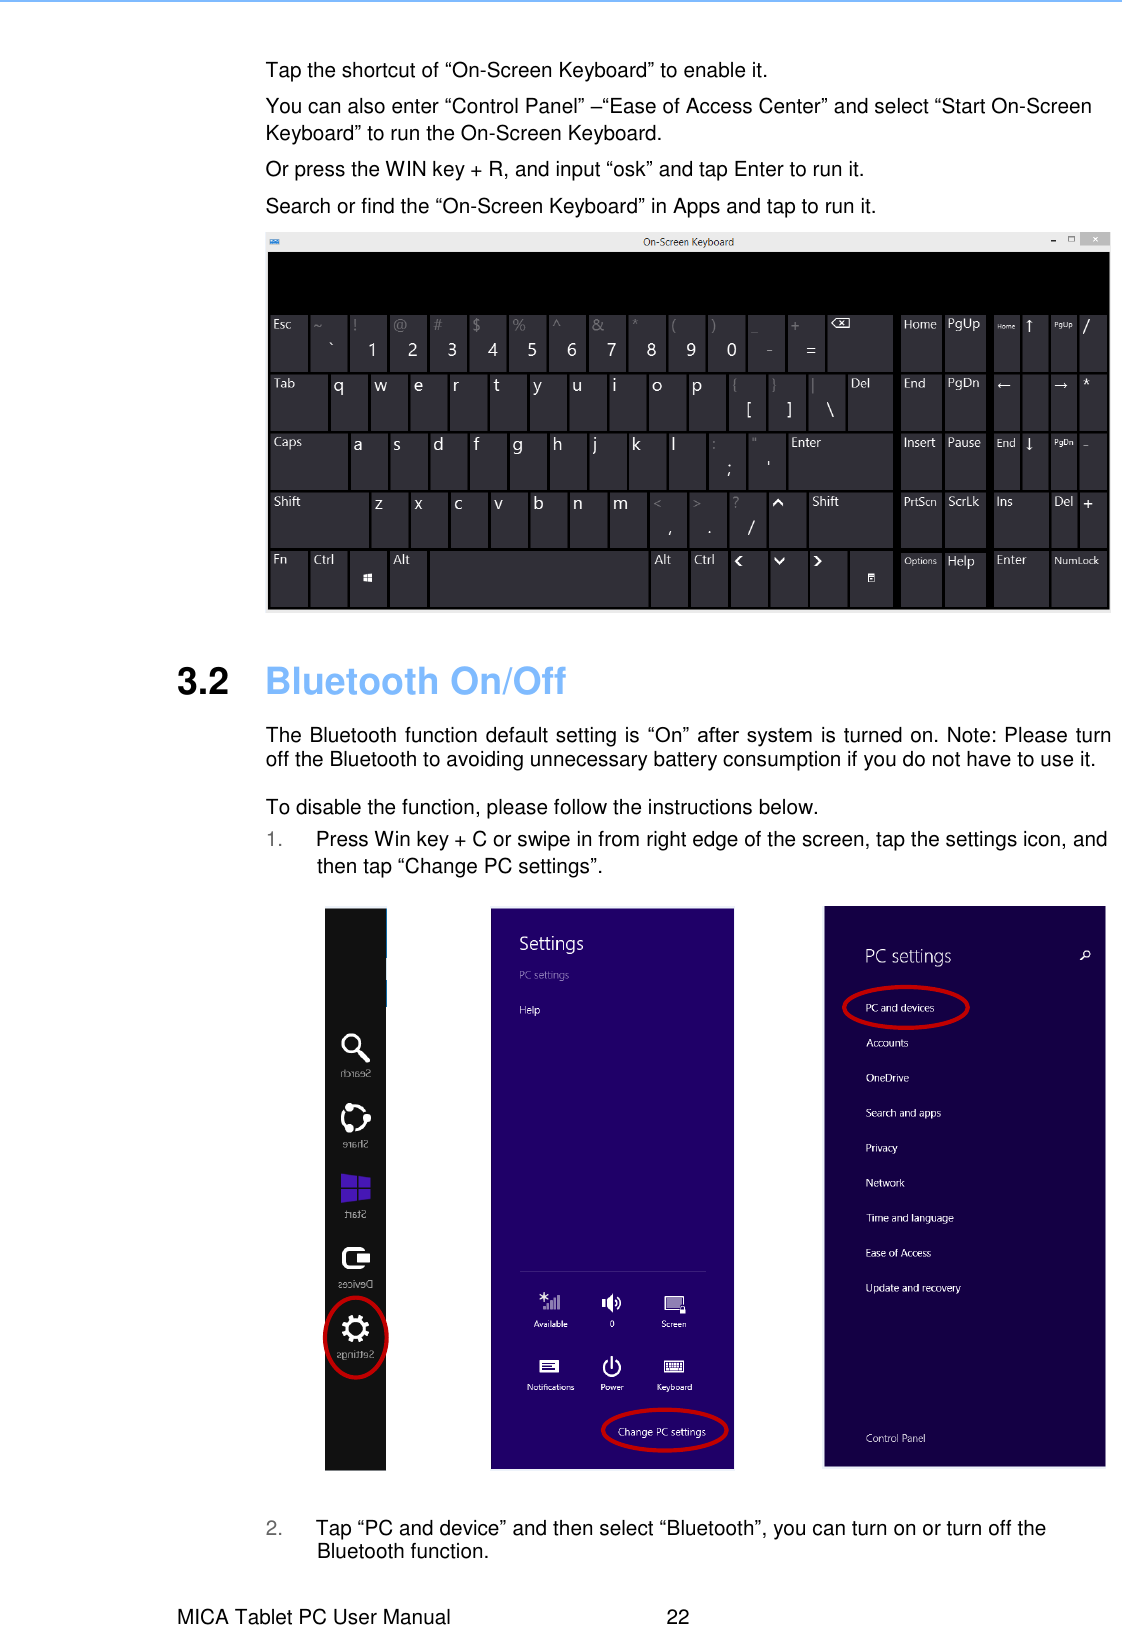  Tap the shortcut of “On-Screen Keyboard” to enable it. You can also enter “Control Panel” –“Ease of Access Center” and select “Start On-Screen Keyboard” to run the On-Screen Keyboard. Or press the WIN key + R, and input “osk” and tap Enter to run it. Search or find the “On-Screen Keyboard” in Apps and tap to run it.     3.2  Bluetooth On/Off The Bluetooth function default setting is “On” after system is turned on. Note: Please turn off the Bluetooth to avoiding unnecessary battery consumption if you do not have to use it.    To disable the function, please follow the instructions below. 1. Press Win key + C or swipe in from right edge of the screen, tap the settings icon, and then tap “Change PC settings”. 2. Tap “PC and device” and then select “Bluetooth”, you can turn on or turn off the Bluetooth function. MICA Tablet PC User Manual  22 